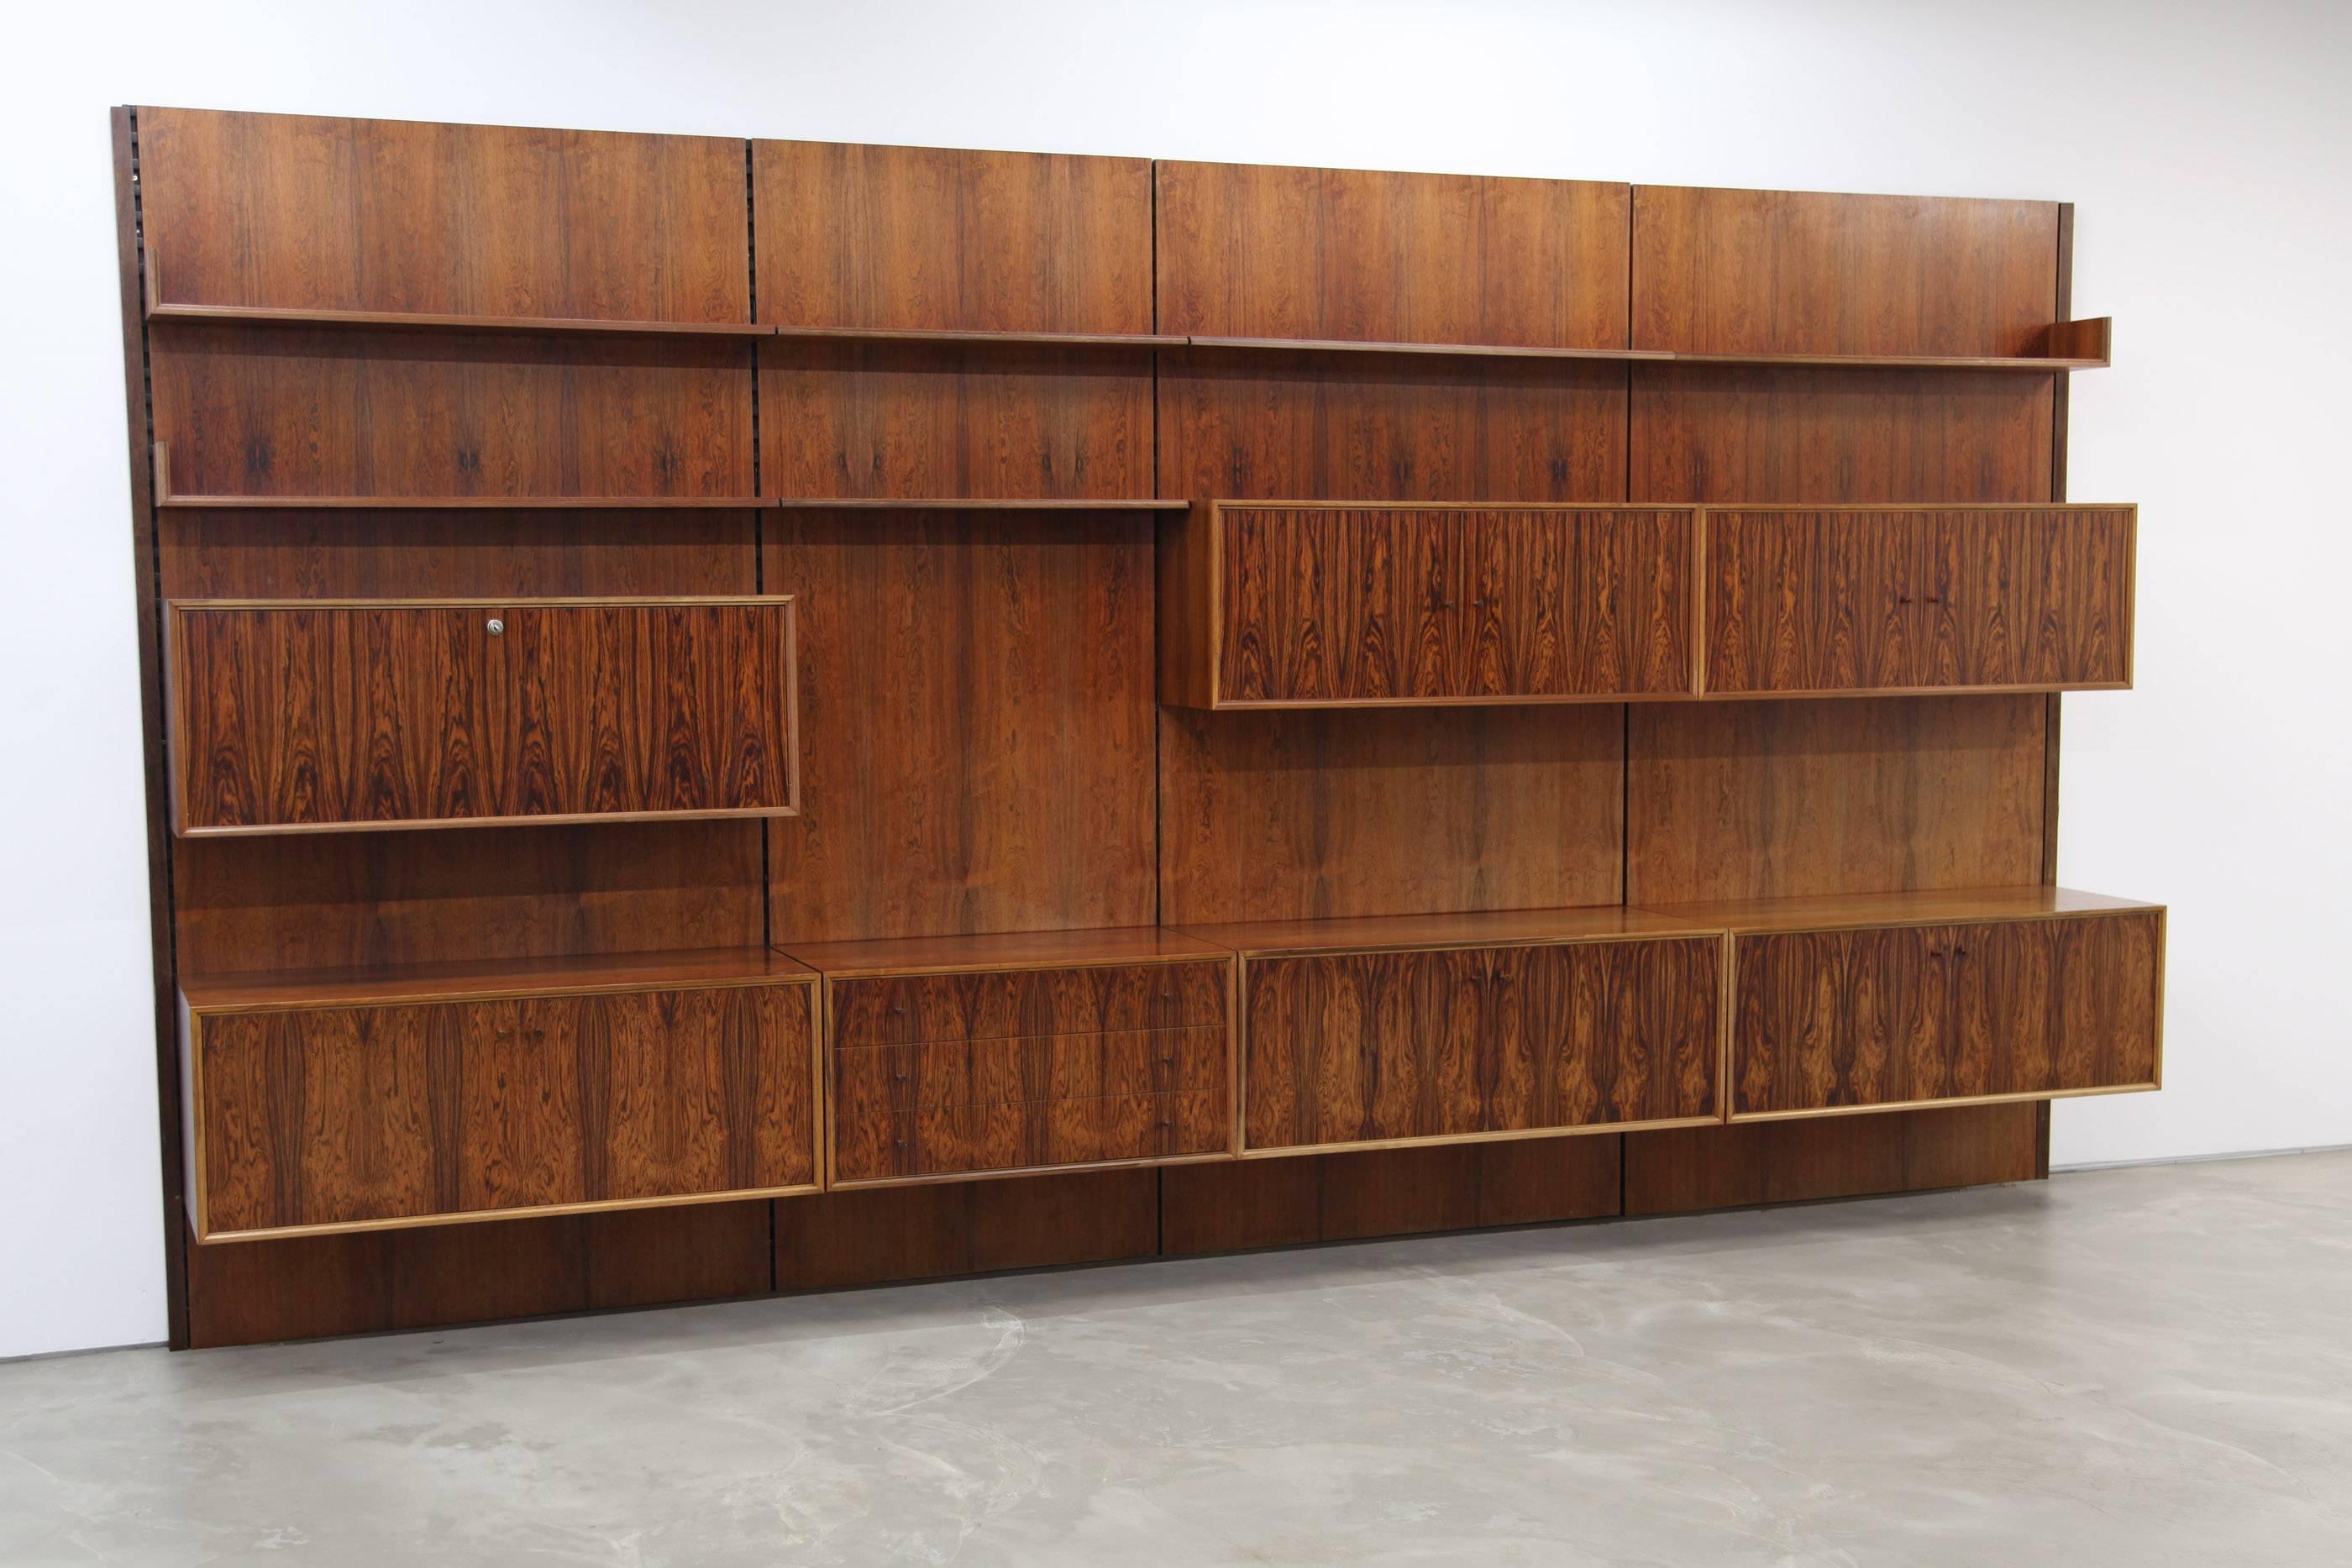 Very well made wall unit made with rosewood veneer by a German high quality manufacturer. This shelf features five cabinets, a bar cabinet and a chest of drawers as well as six shelves. It is in very good condition, the veneer shows some fading.